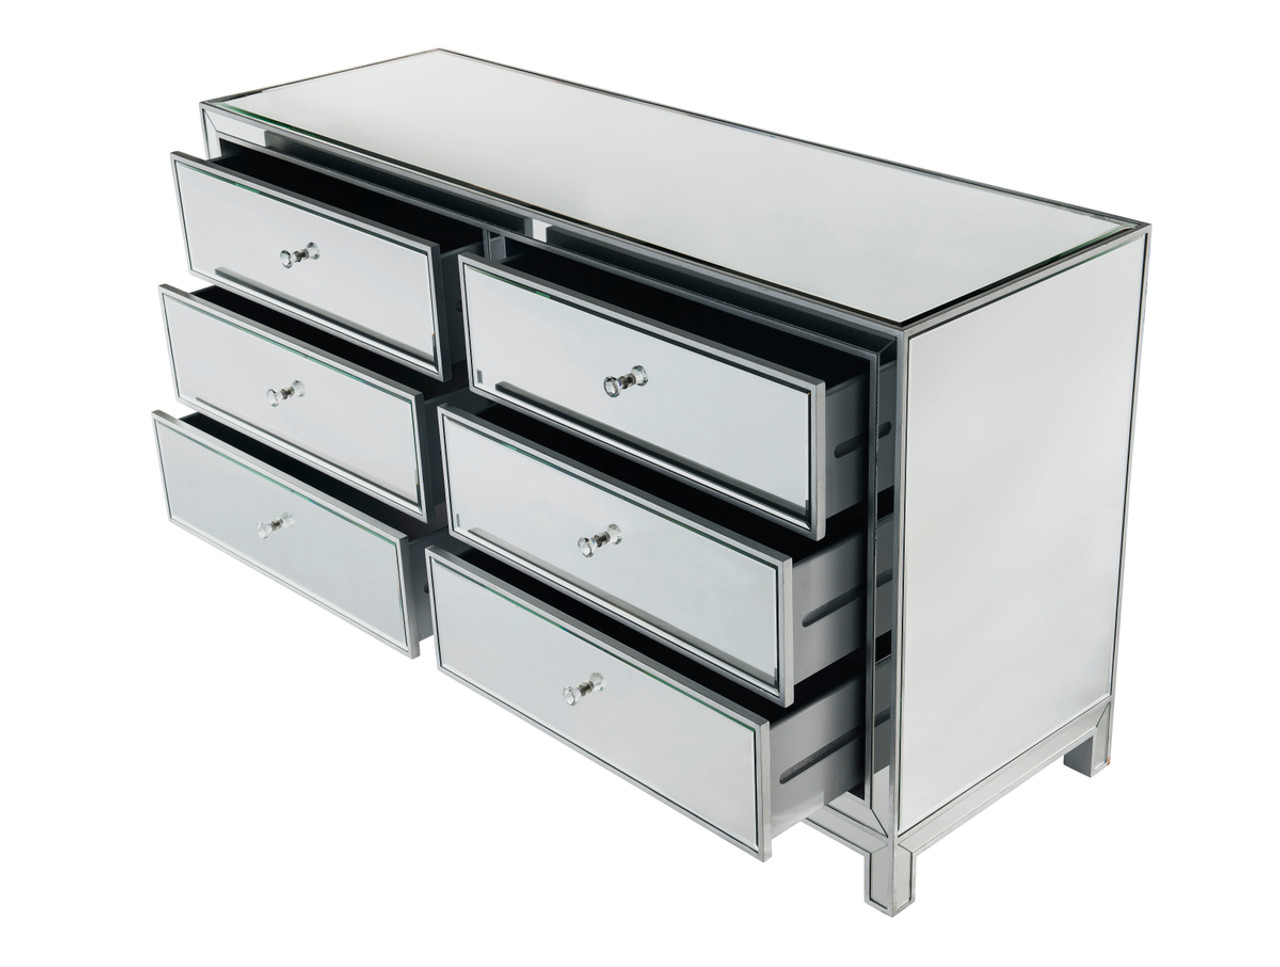 ELEGANT DECOR MF72036 Dresser 6 drawers 60in. W x 18in. D x 32in. H in antique silver paint